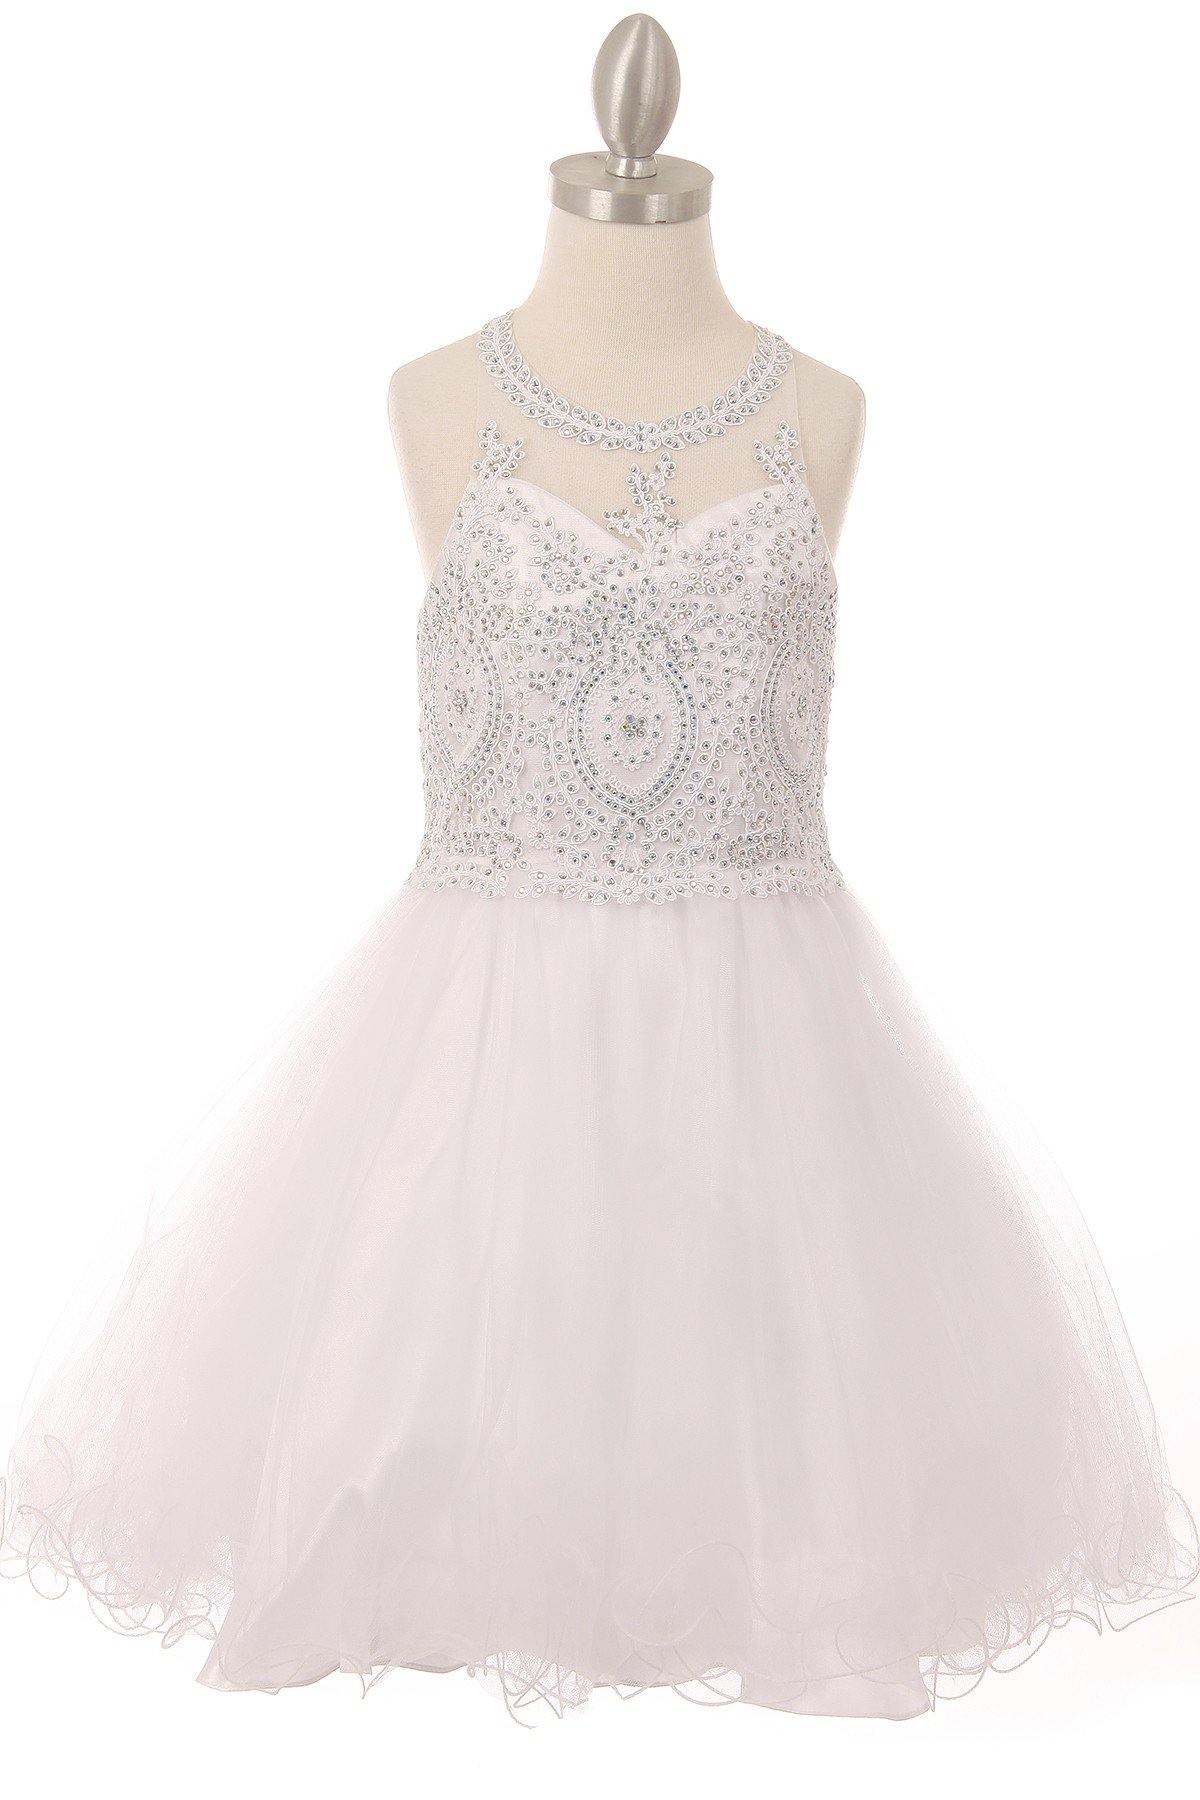 Beaded Sequin Short Flower Girl Dress - The Dress Outlet Cinderella Couture